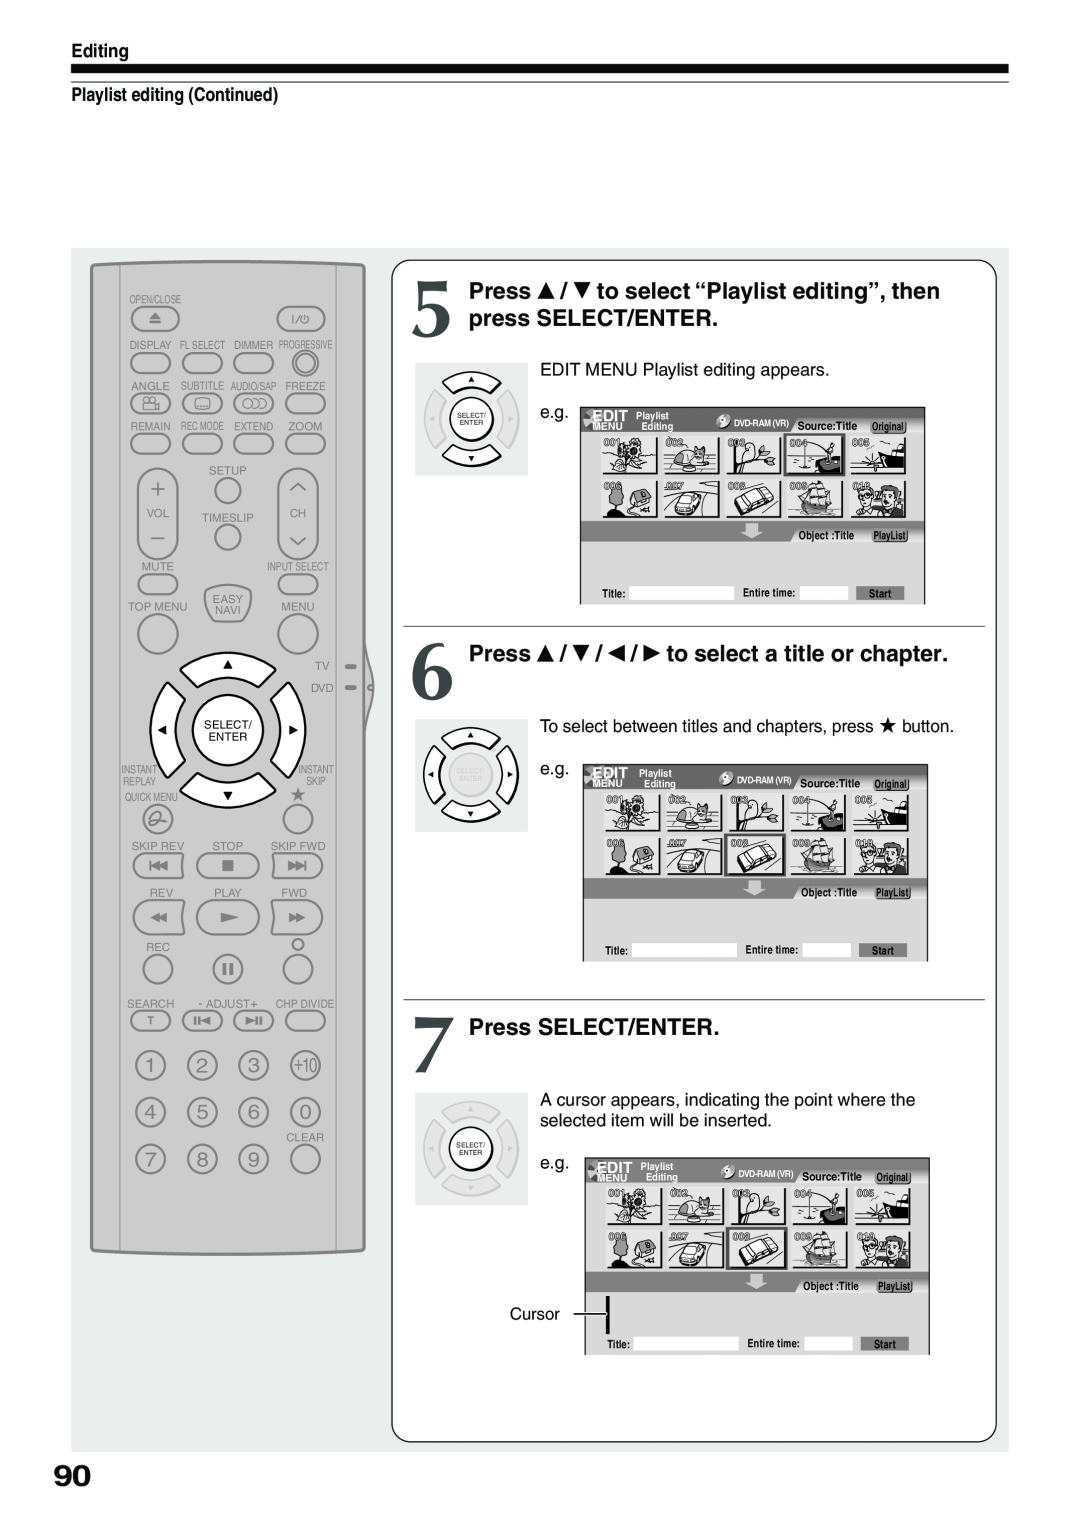 Toshiba D-KR4SU Press, to select a title or chapter, Editing Playlist editing Continued, press SELECT/ENTER, button 